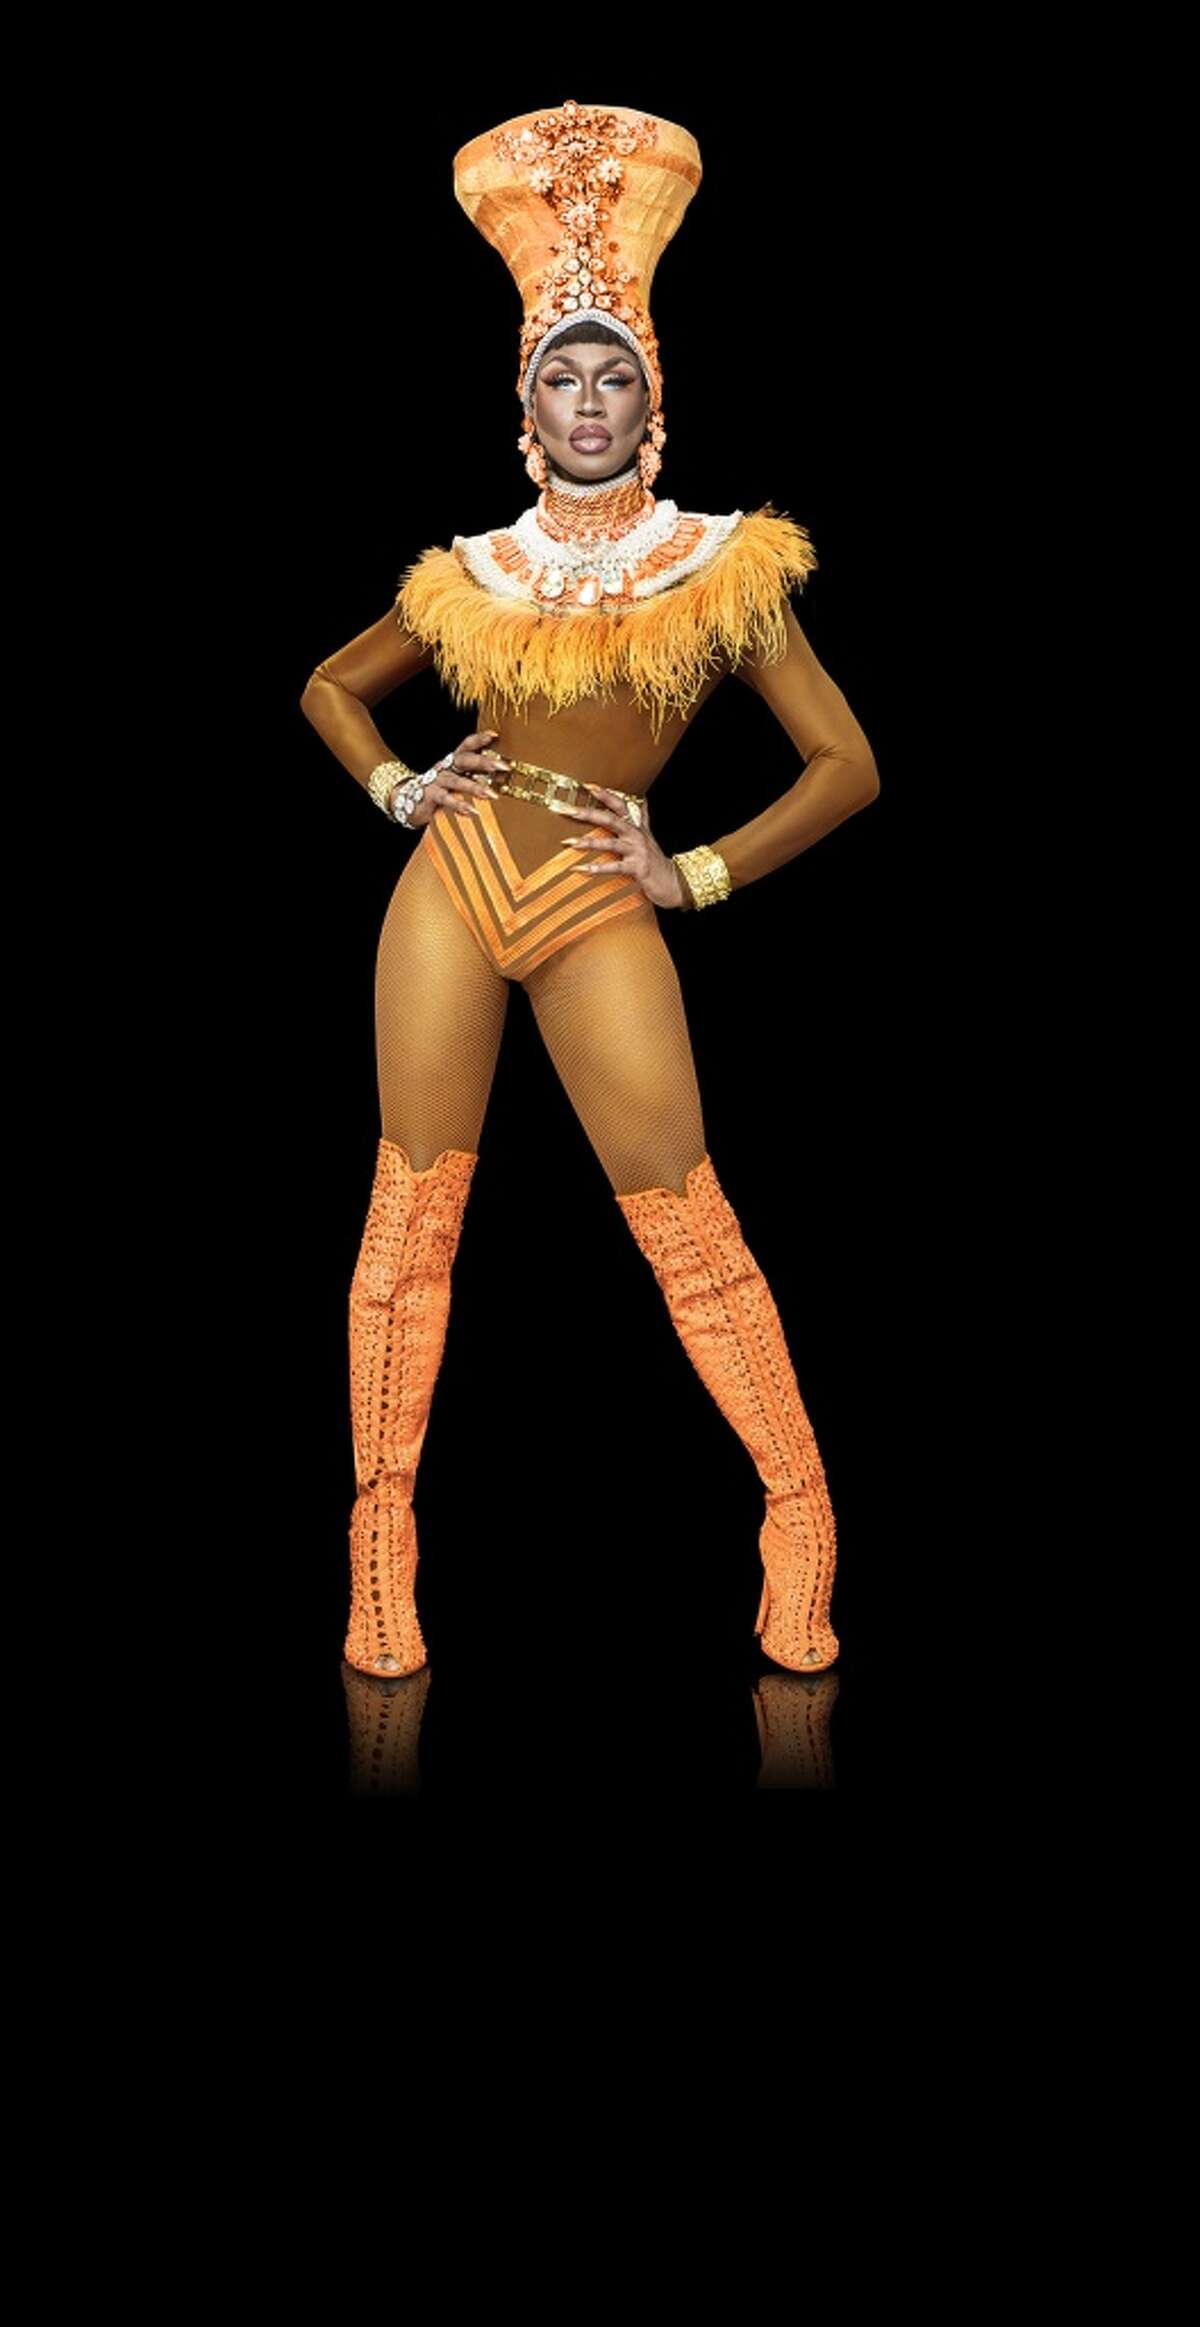 Shea Coulee.